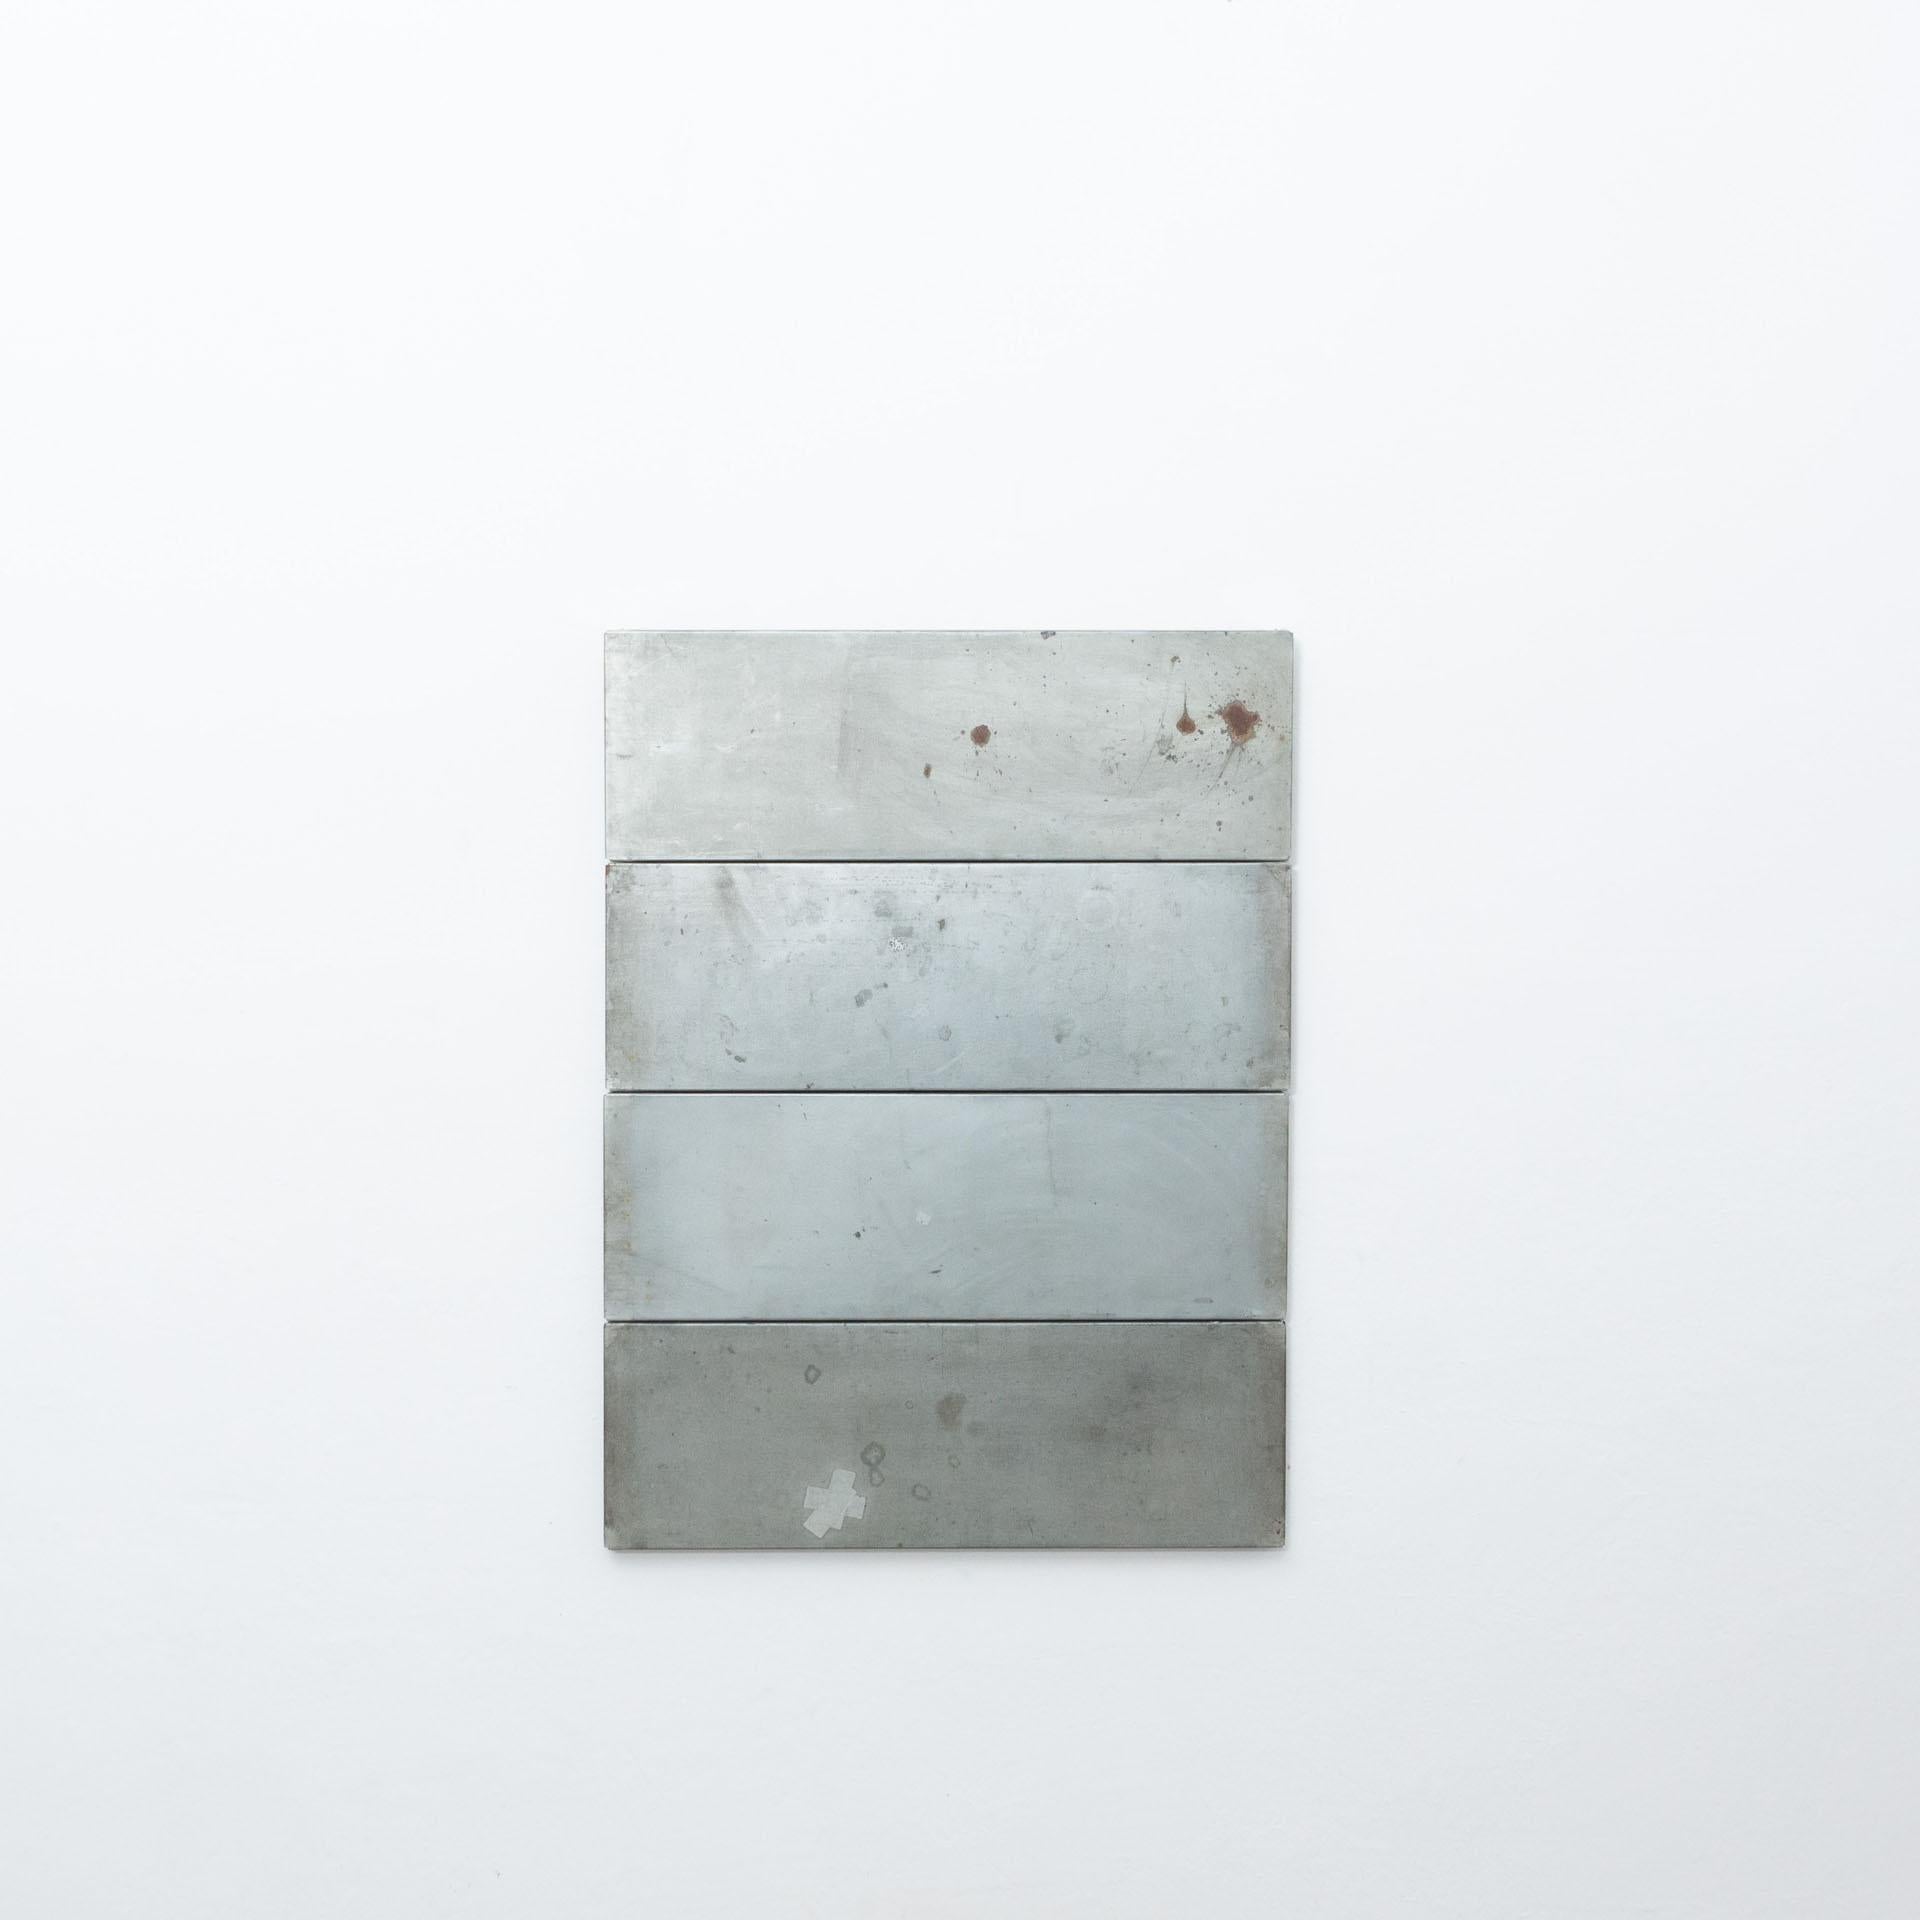 Ramon Horts, Minimalist artwork.

Structures of metal compositions made in Barcelona, circa 2019. 

In original condition.

Scraped metal, rusted and varnished.